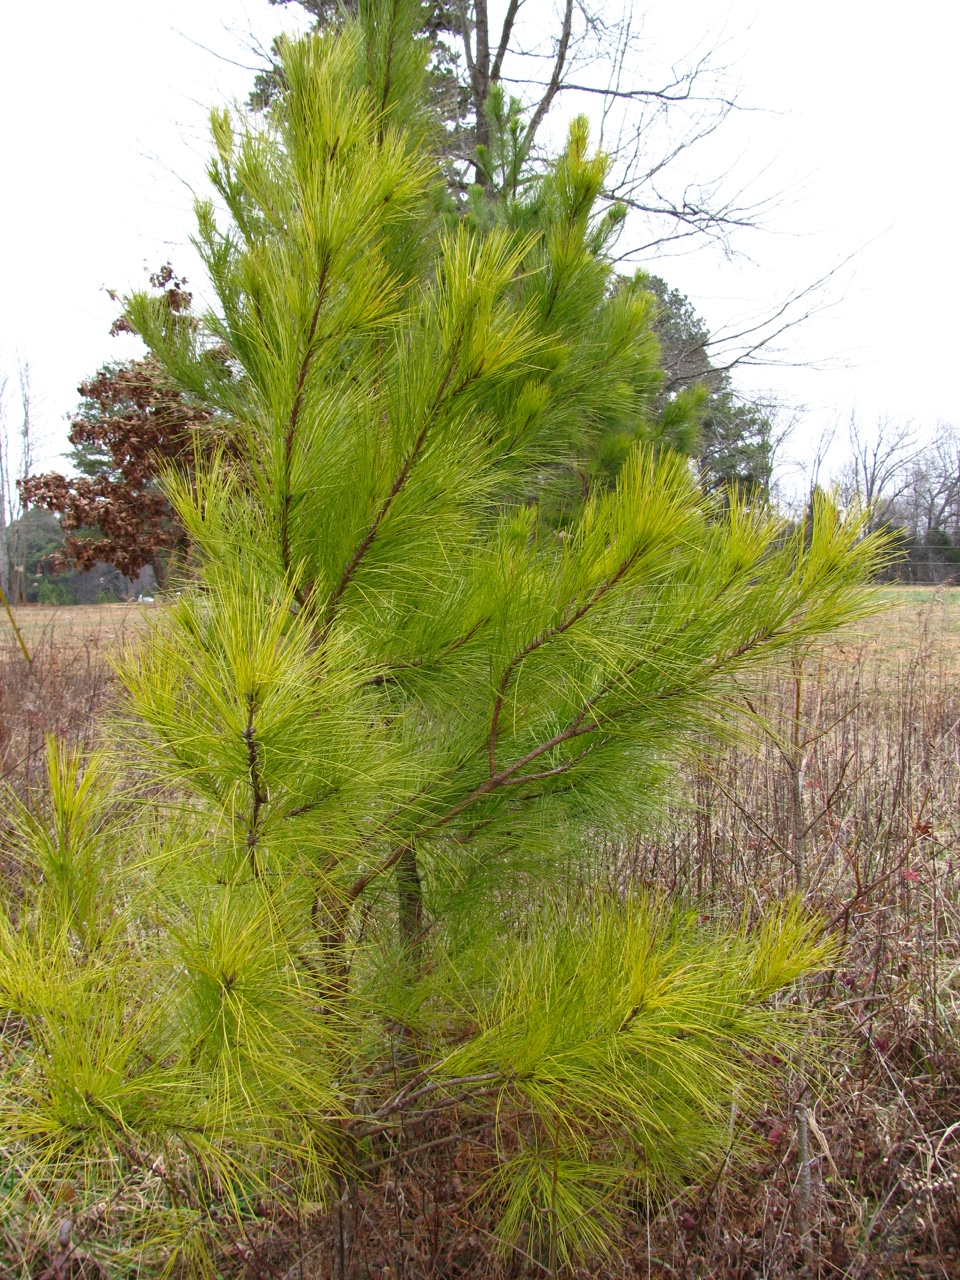 The Scientific Name is Pinus taeda. You will likely hear them called Loblolly Pine, Old Field Pine. This picture shows the Young sapling in winter with somewhat unusual color-maybe nutrient stressed? of Pinus taeda